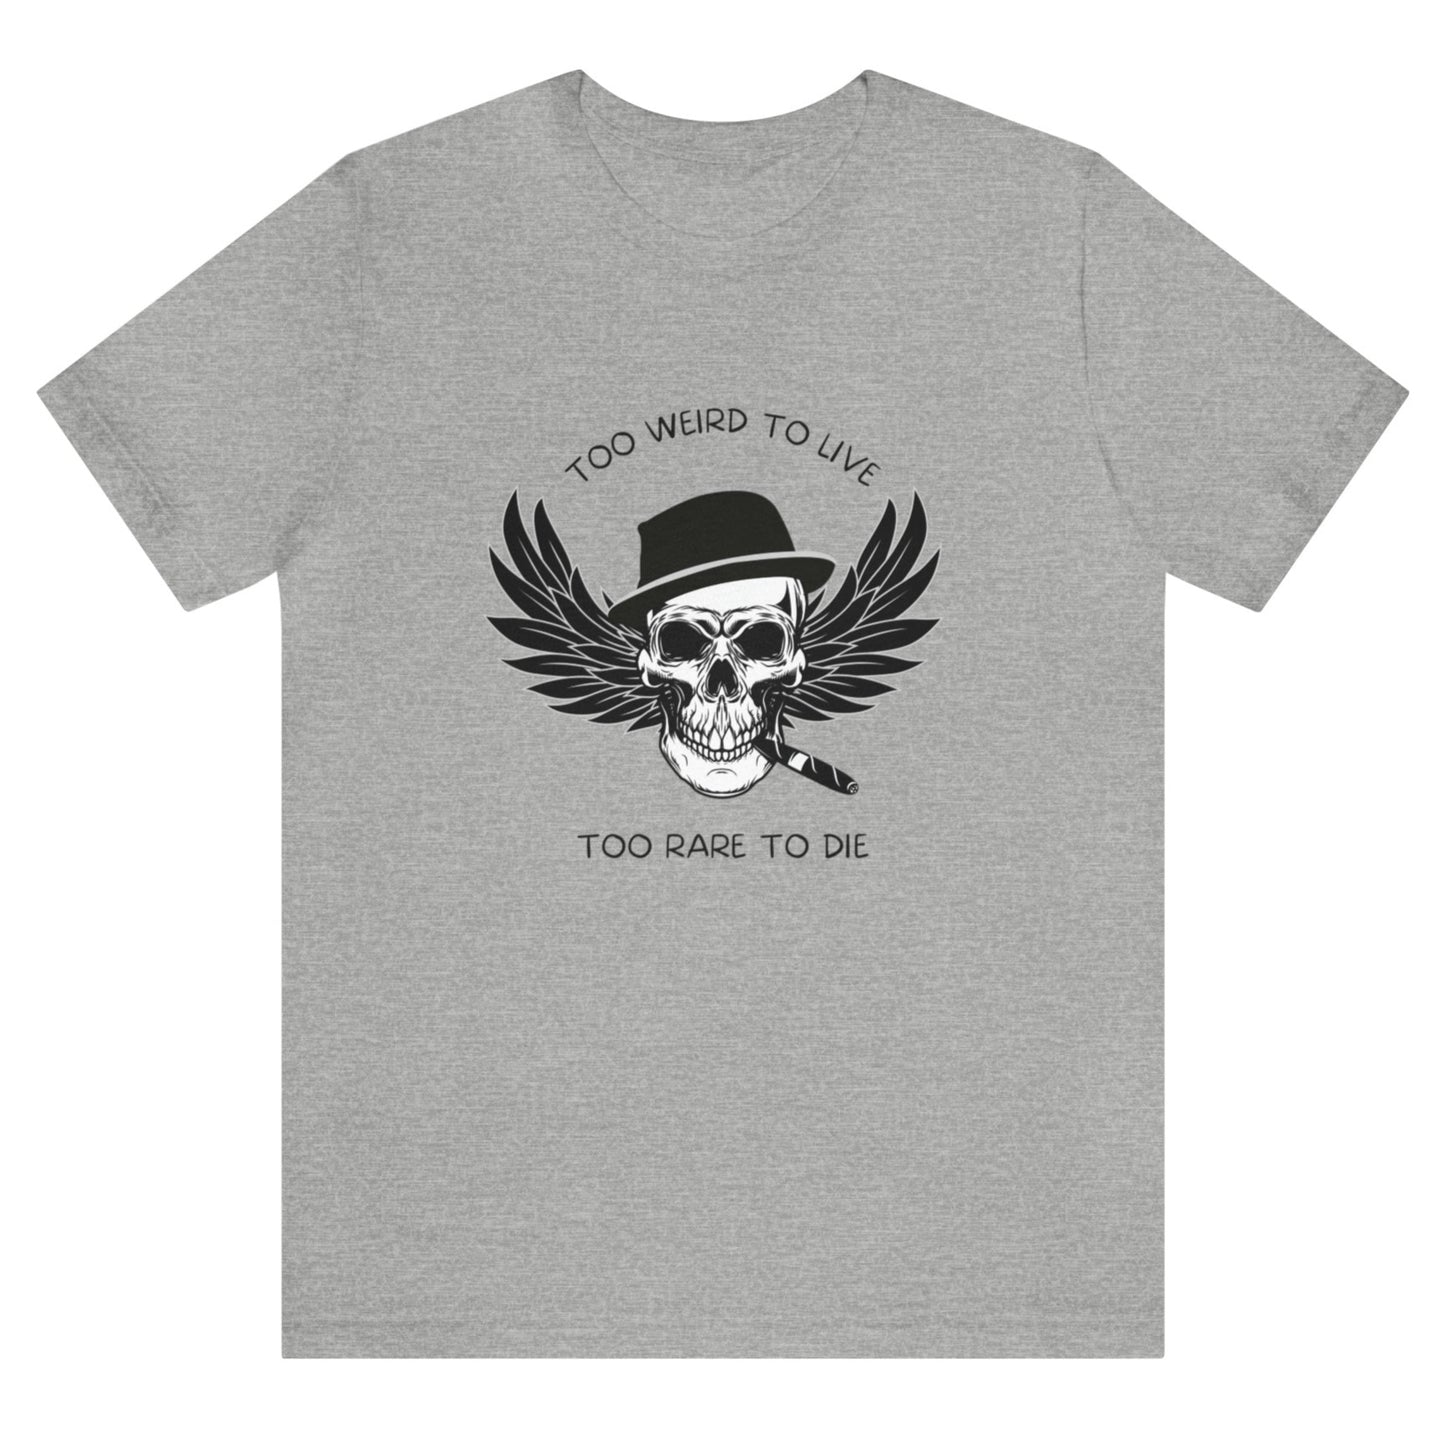 too-weird-to-live-too-rare-to-die-athletic-heather-t-shirt-with-skull-and-wings